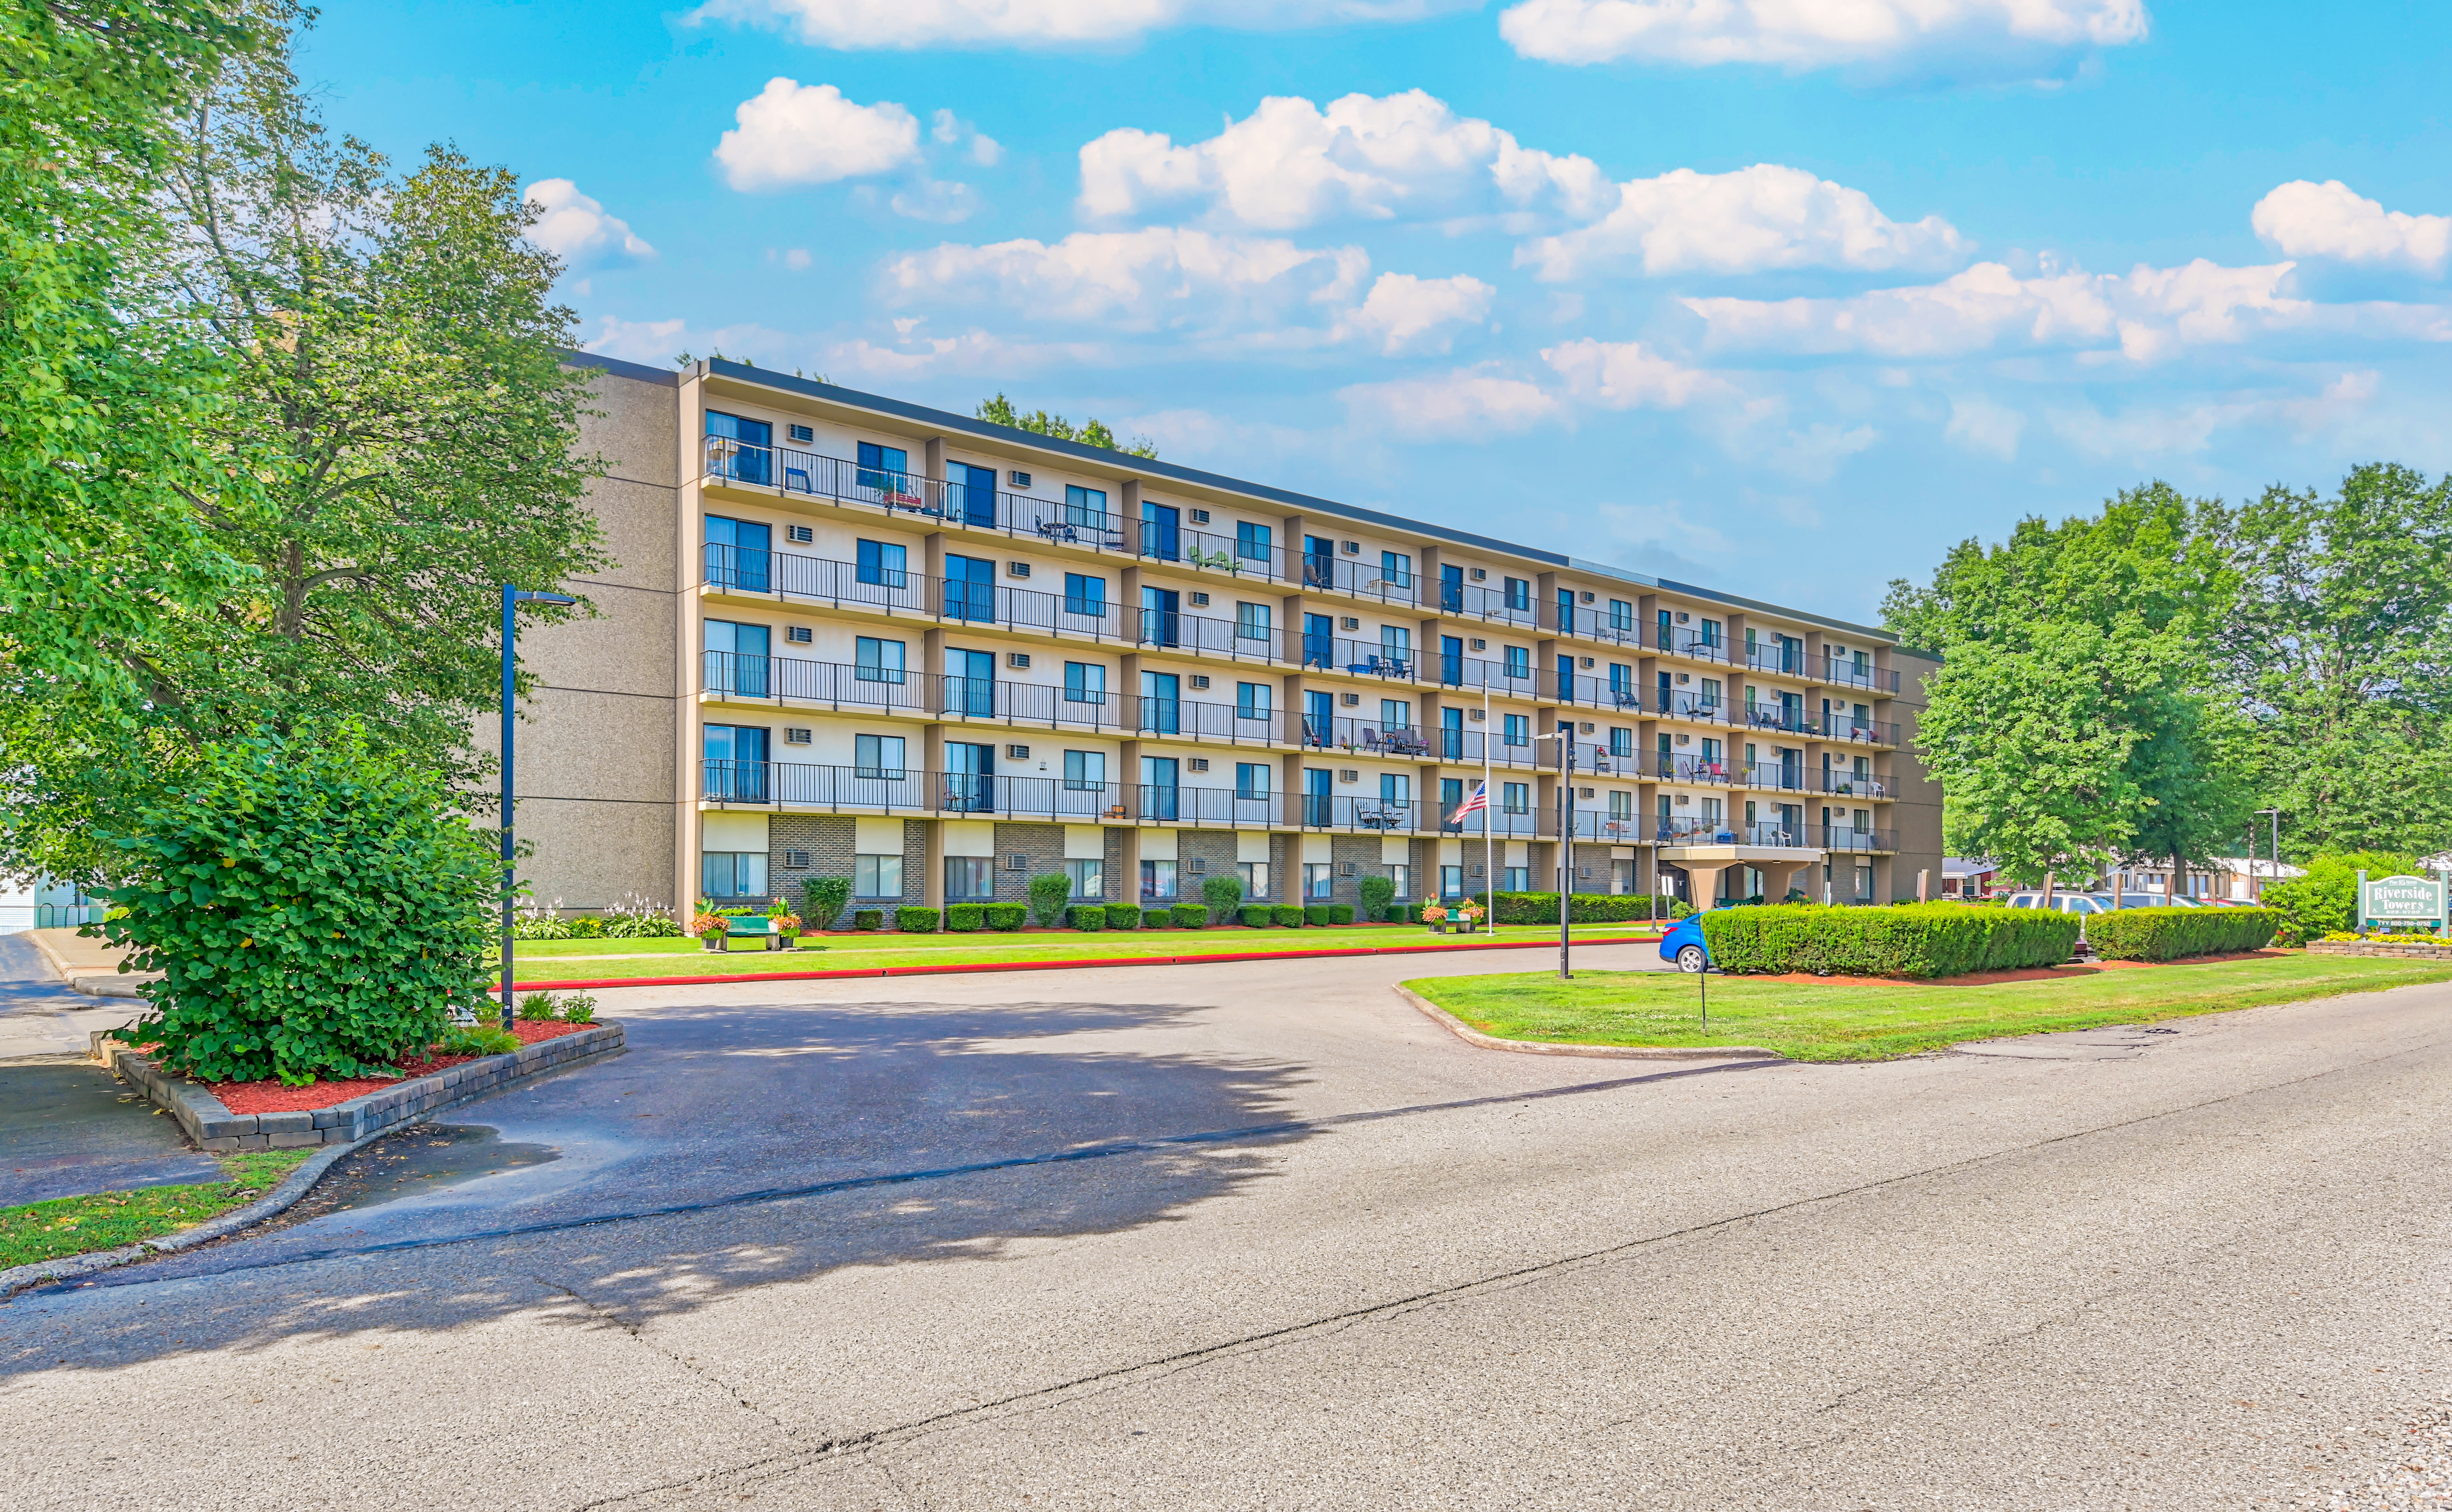 Exterior grounds and sidewalk at Riverside Towers in Coshocton, Ohio